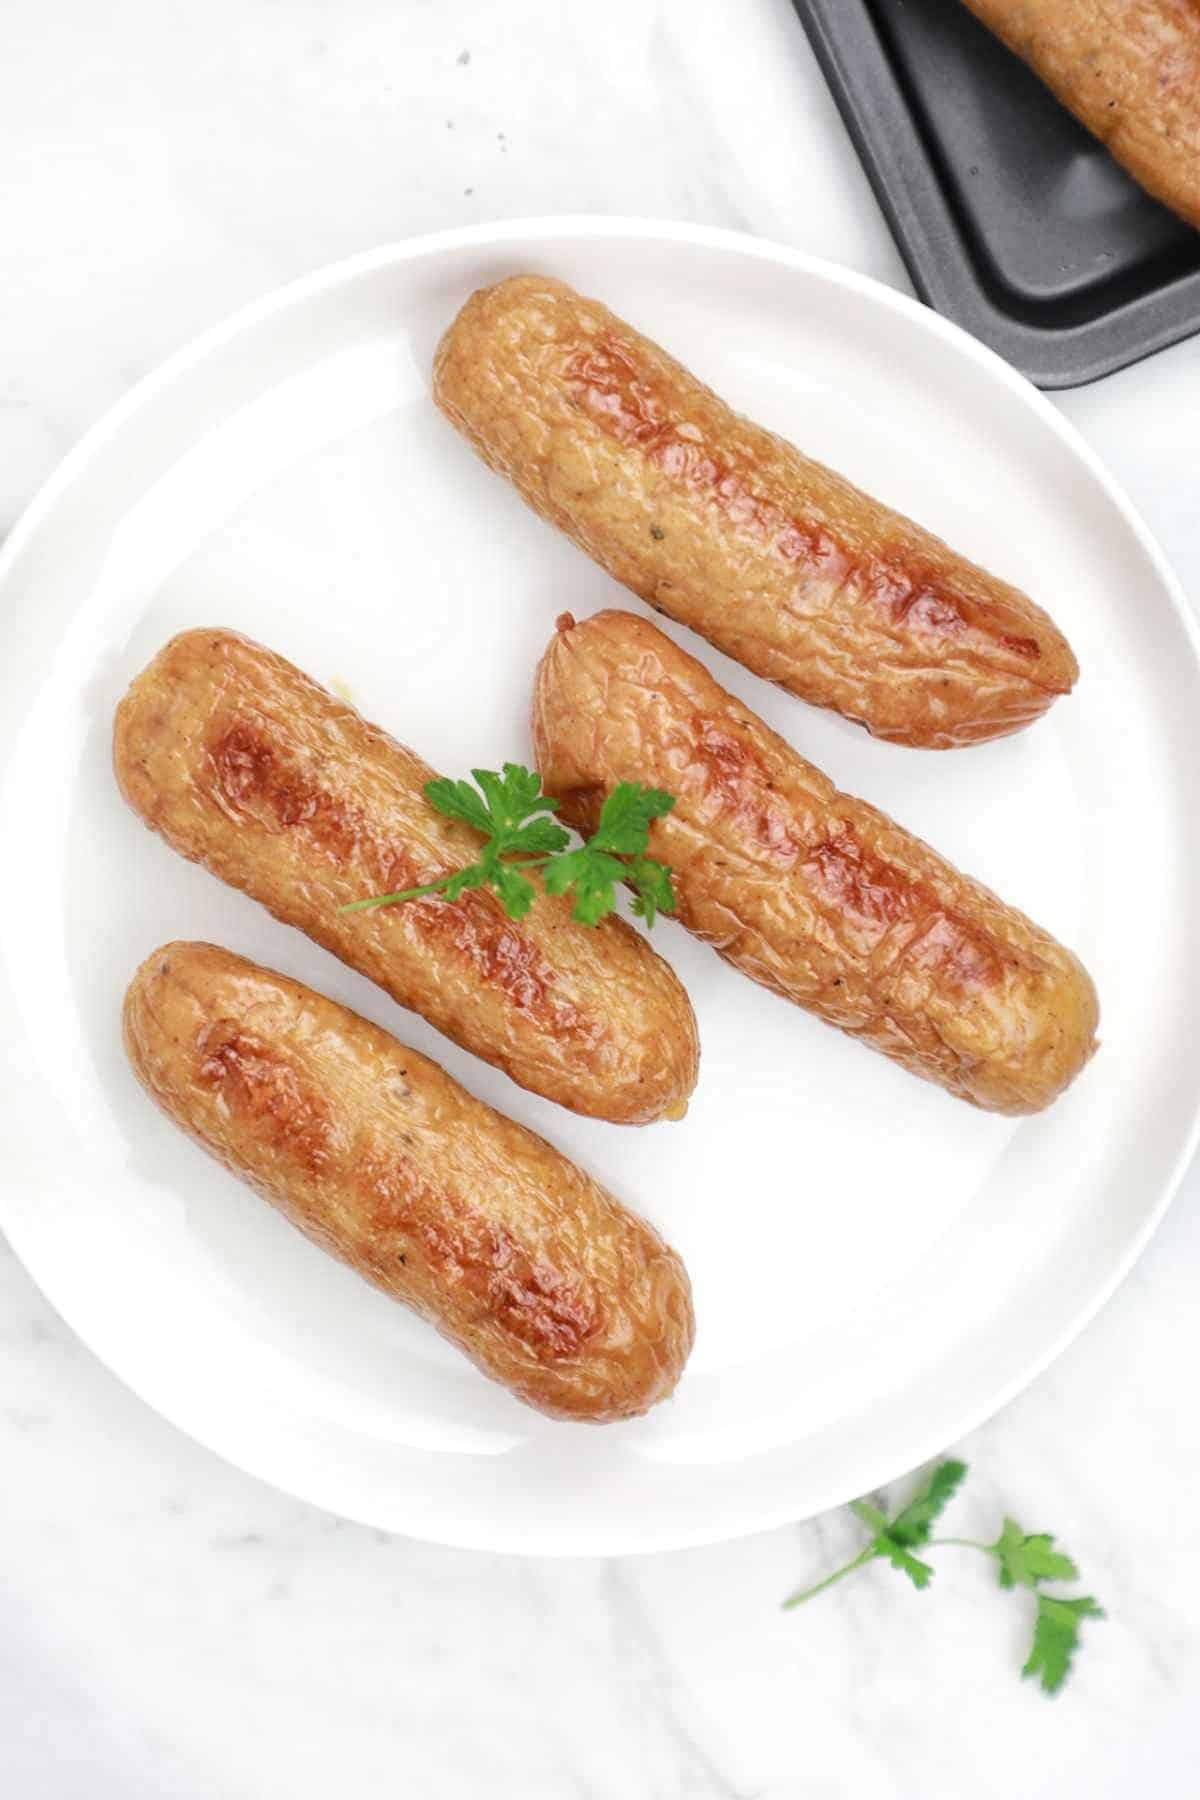 baked sausages on a white plate.